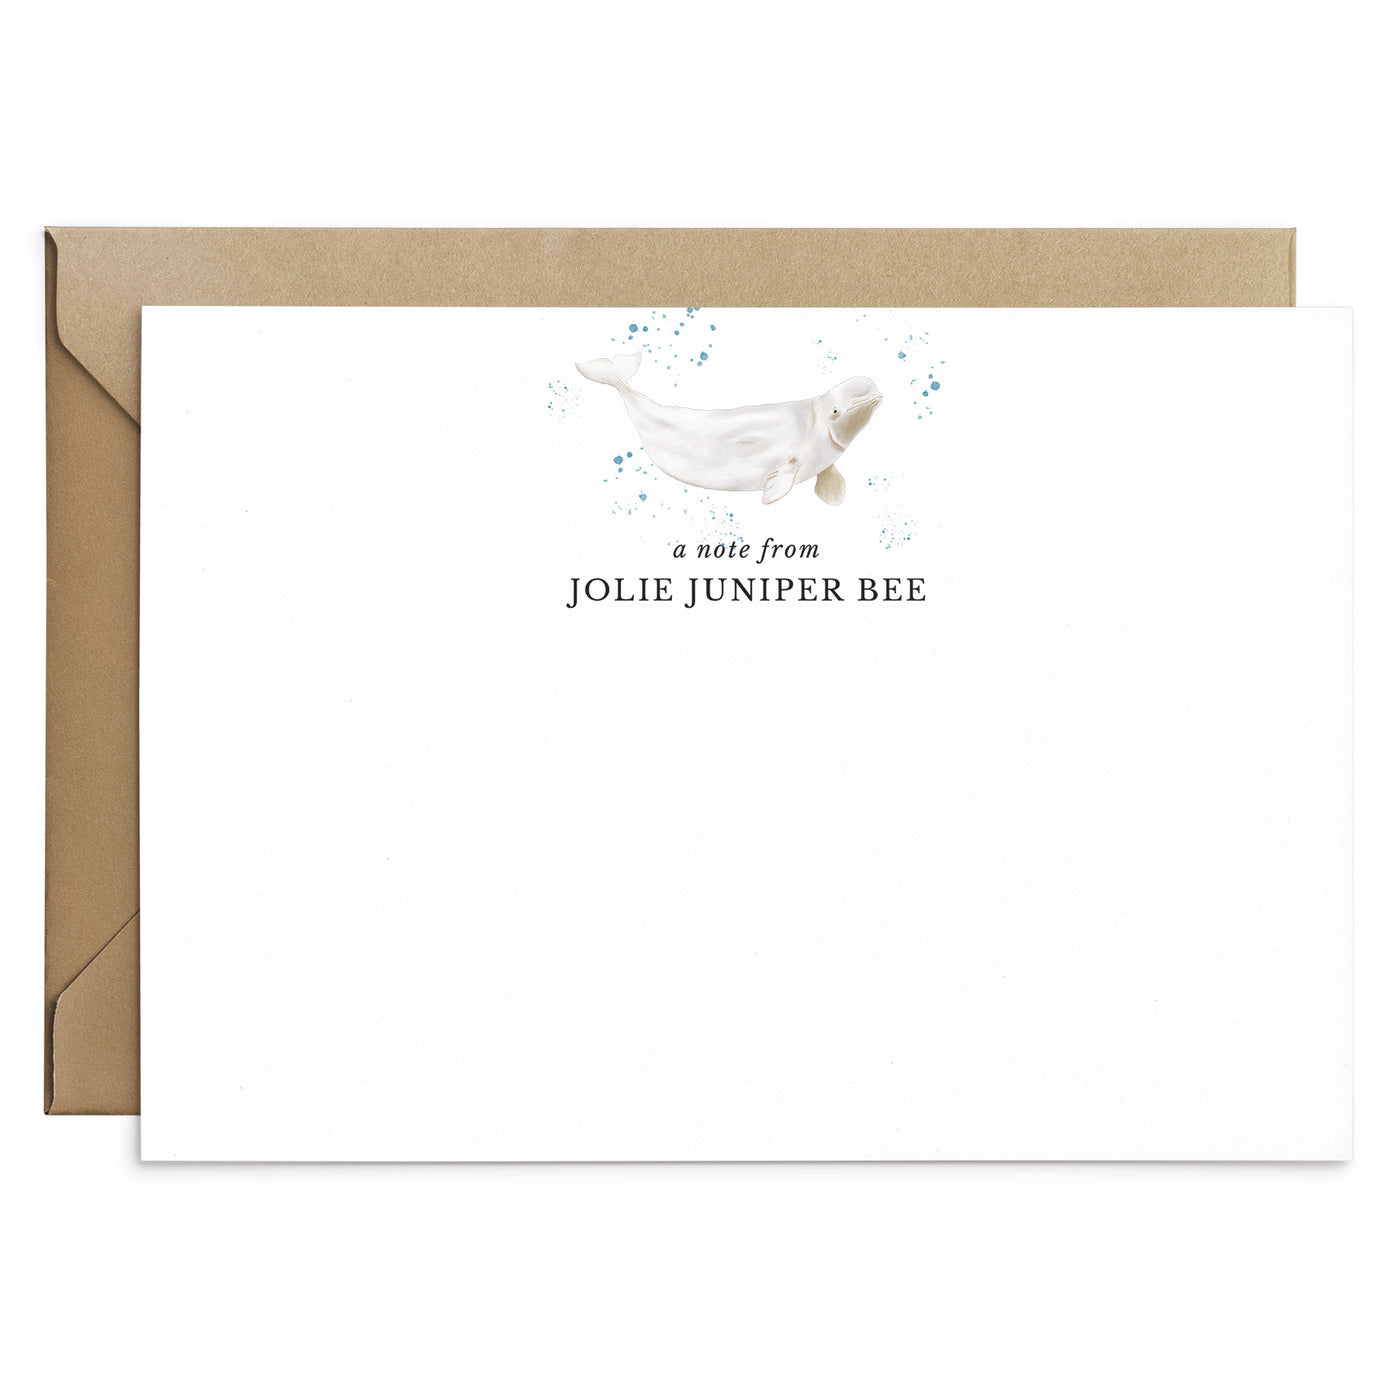 Beluga Whale Personalised Notecard Set - Poppins & Co.